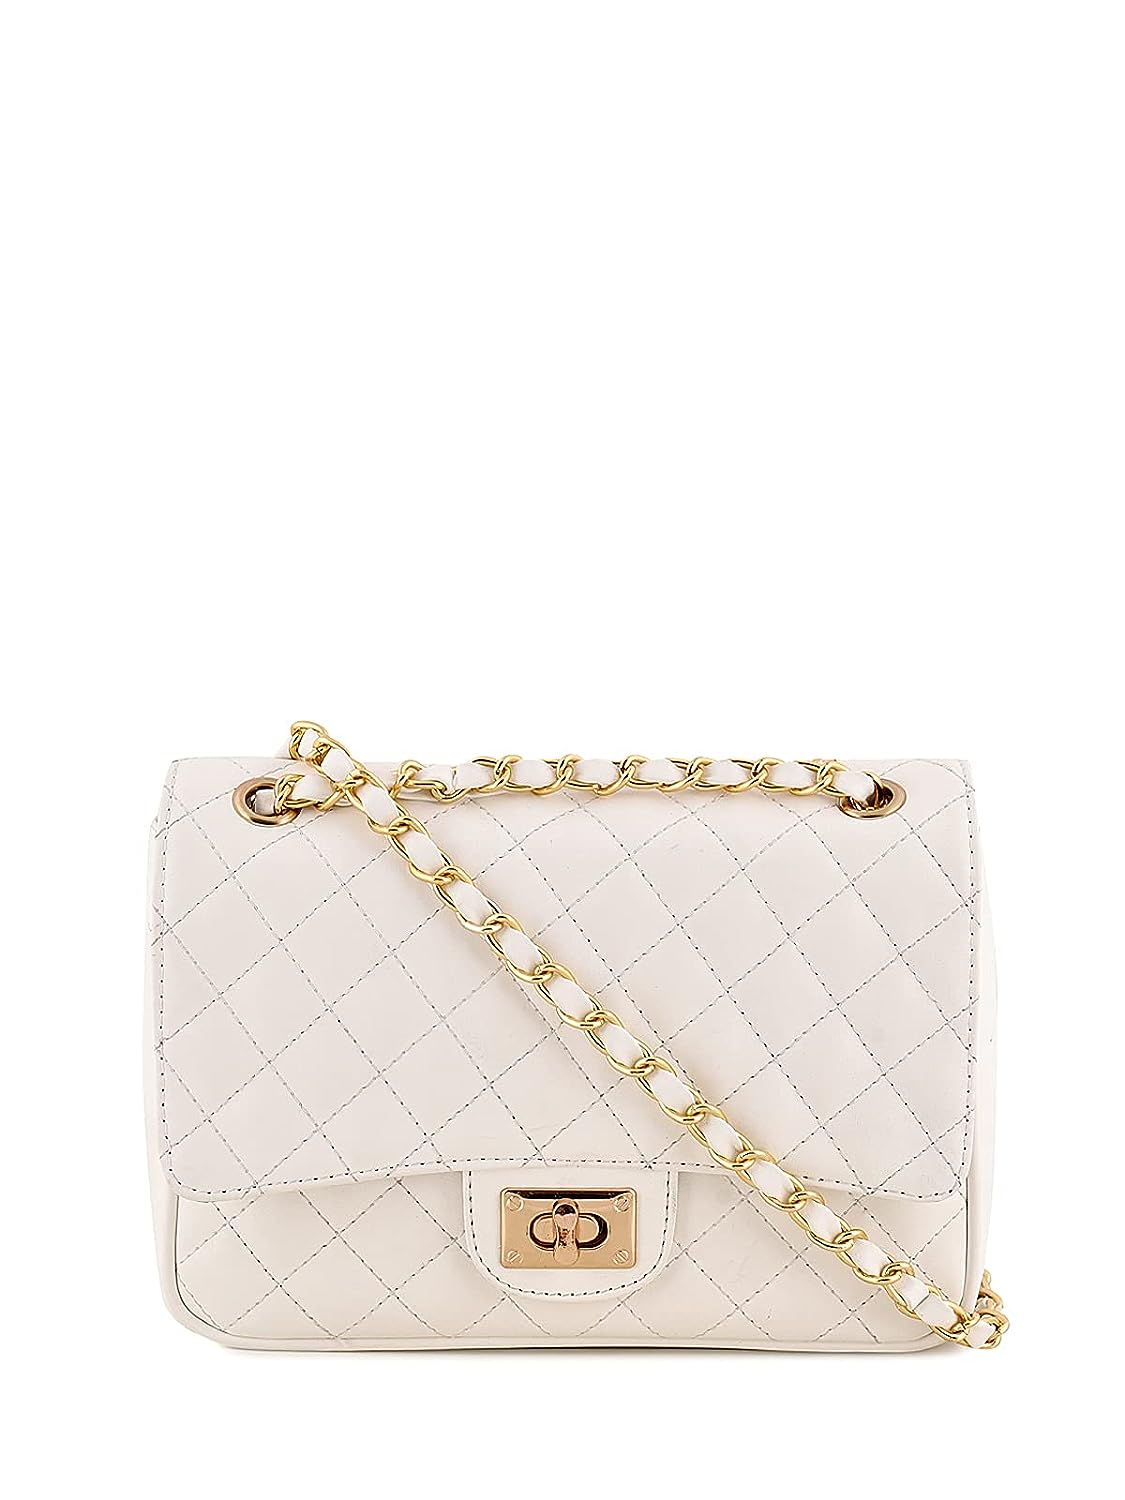 Lychee bags PU Quilted sling and white color  handbags ( white)